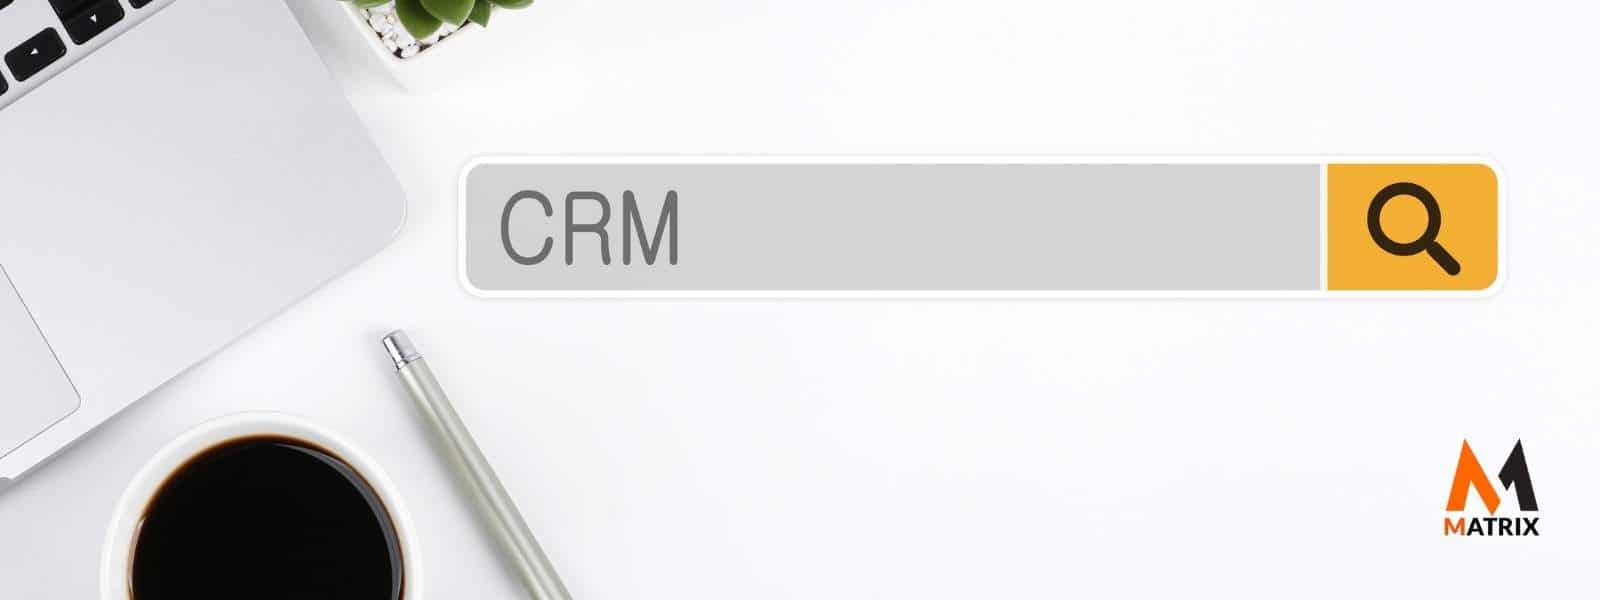 How to get started CRM